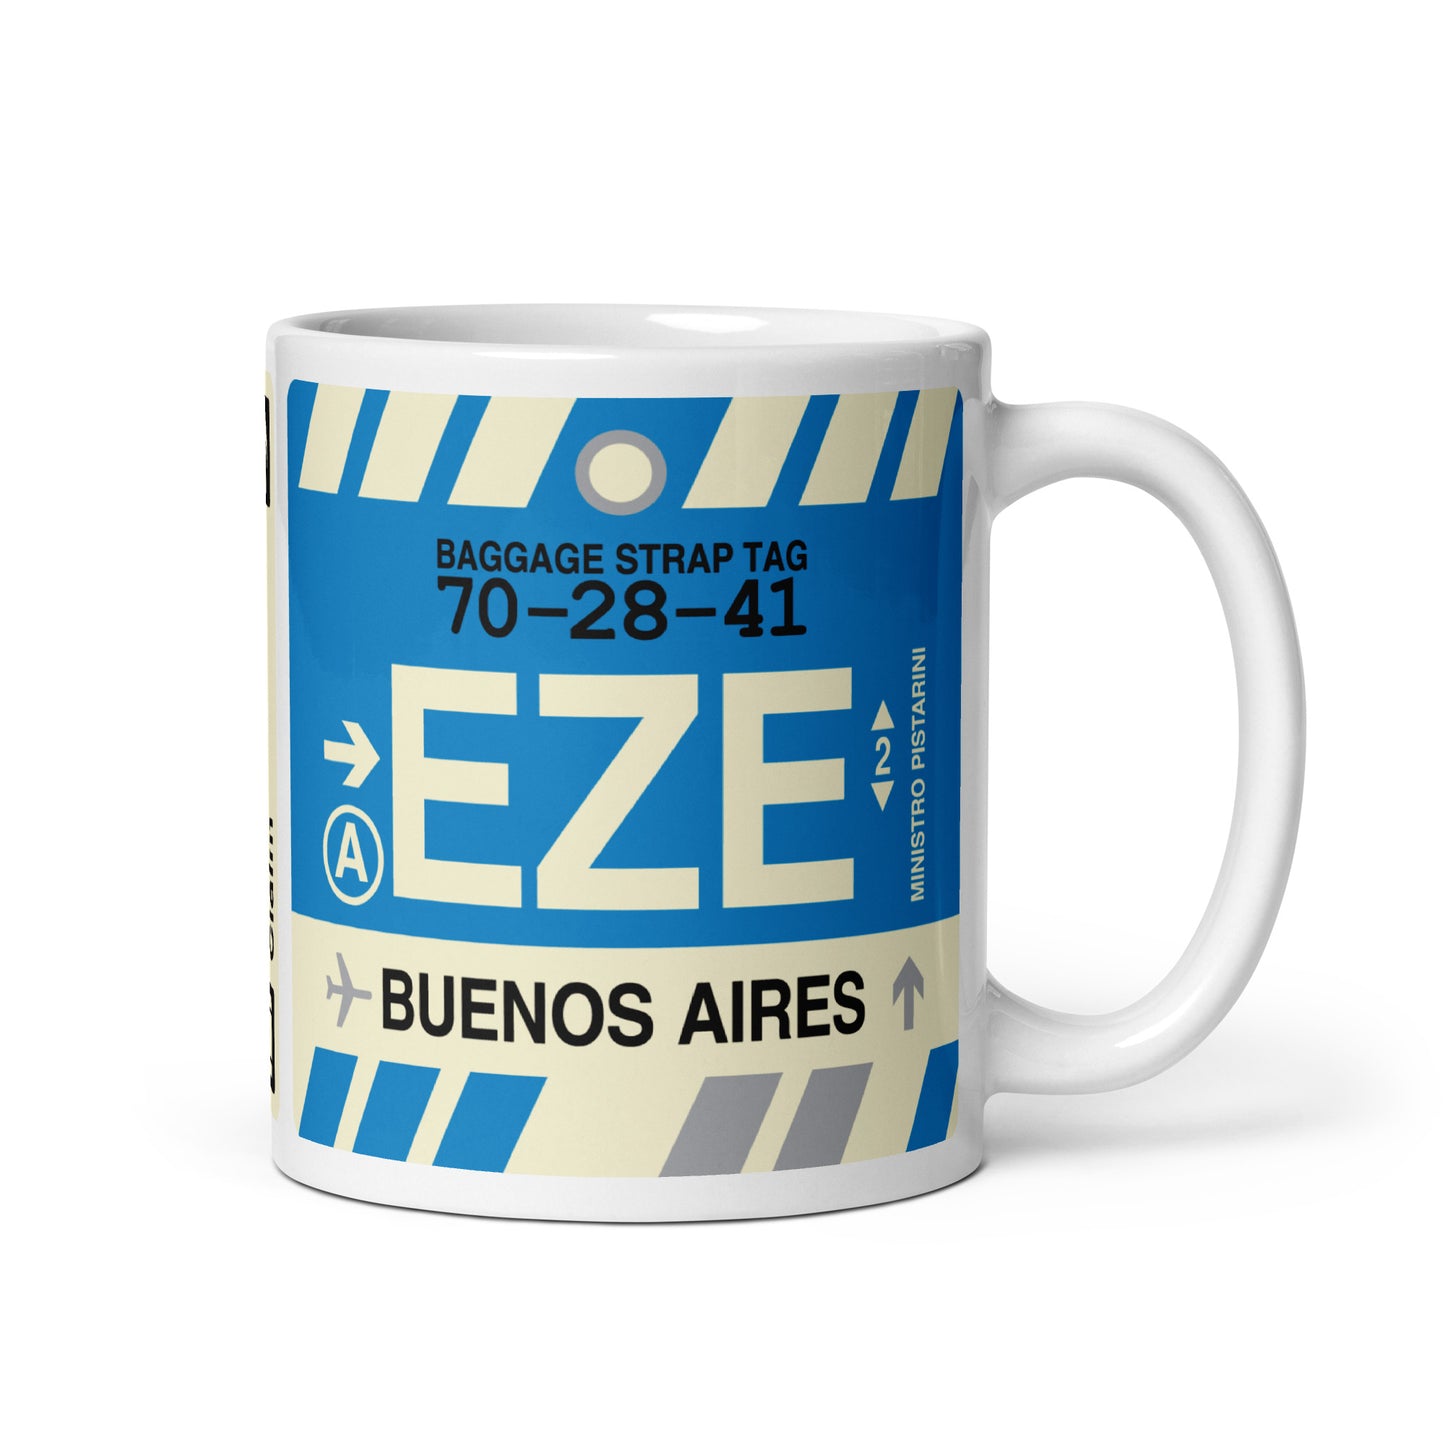 Travel Gift Coffee Mug • EZE Buenos Aires • YHM Designs - Image 01